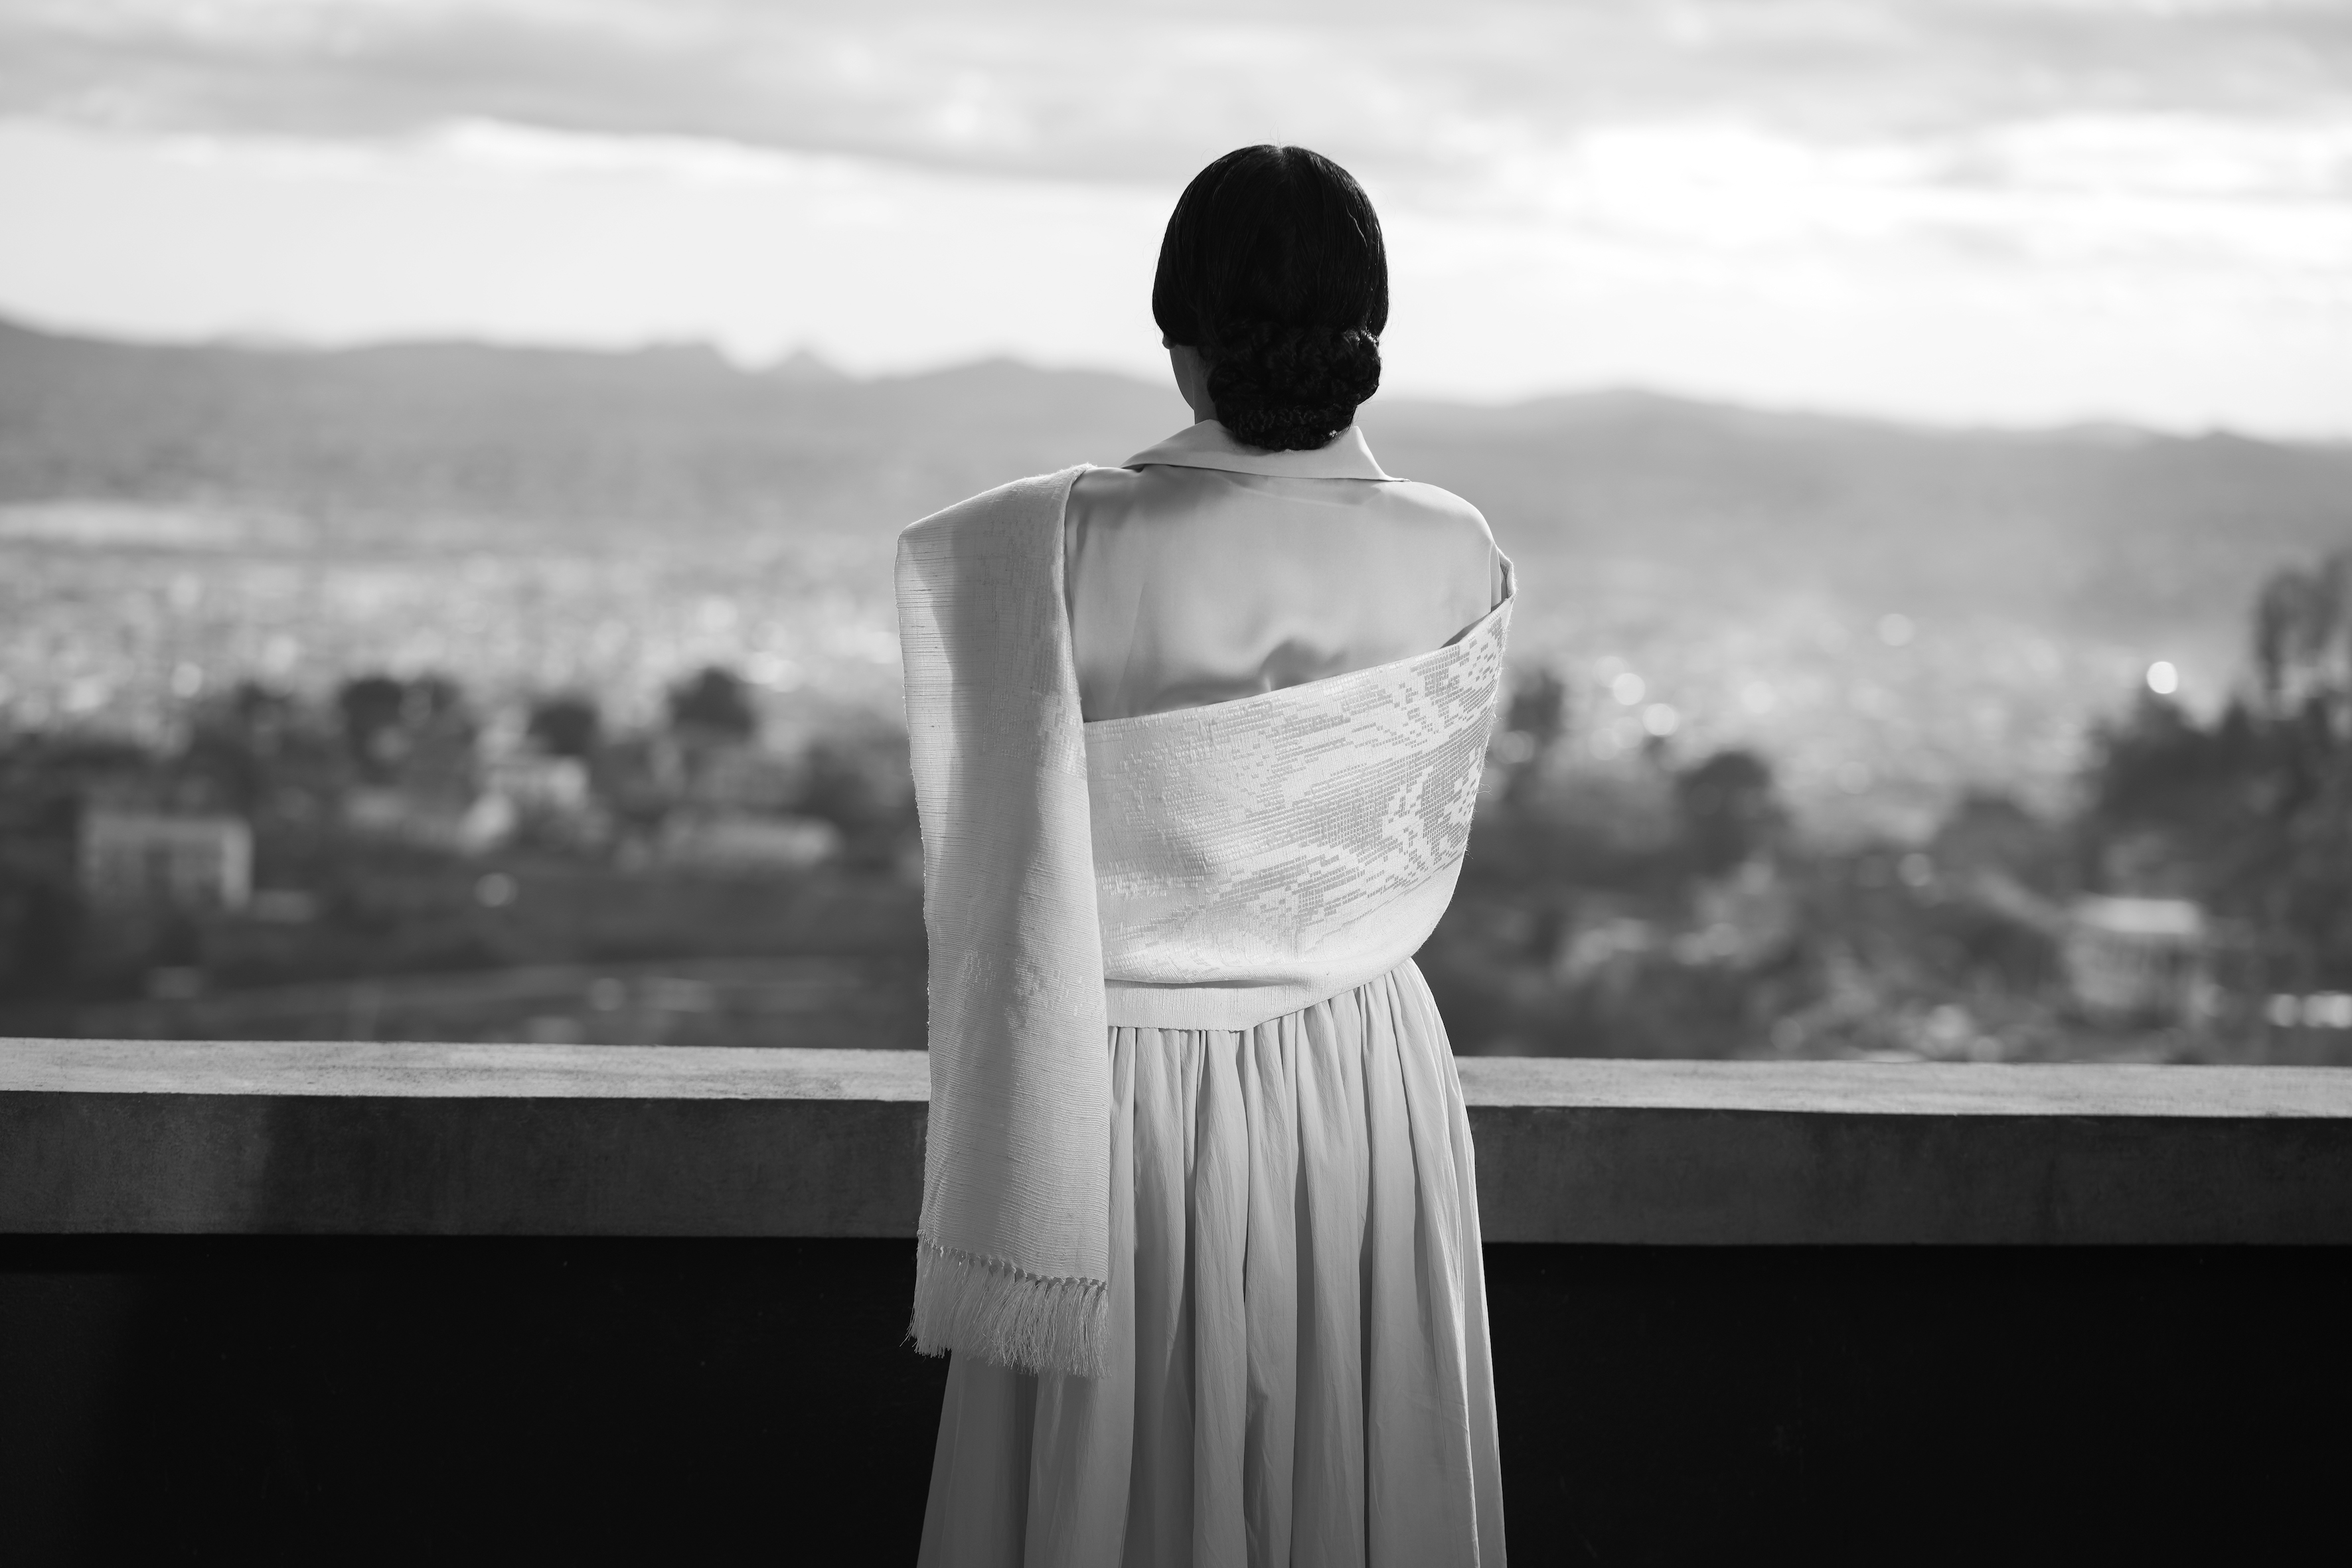 You see a film still from Joël Andrianomearisa's PLEASE SING ME MY SONG BEFORE YOU GO. It's a black and white shot and you can see a woman in a light-colored dress from behind, looking out over a city on a kind of balcony.